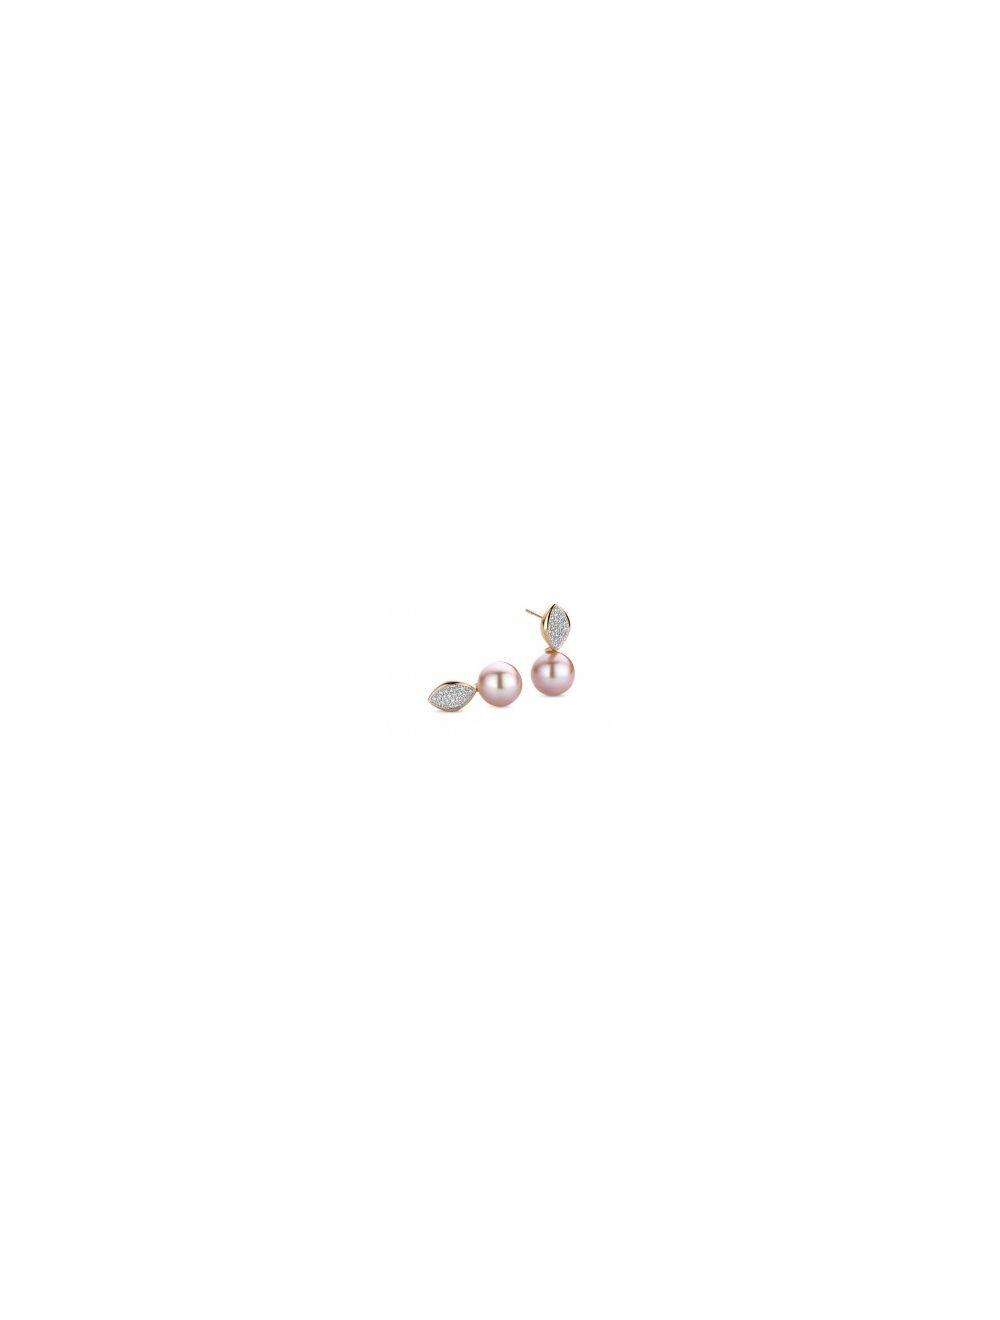 # Rose gold earrings with freshwater pearls and 0.13ct natural diamonds